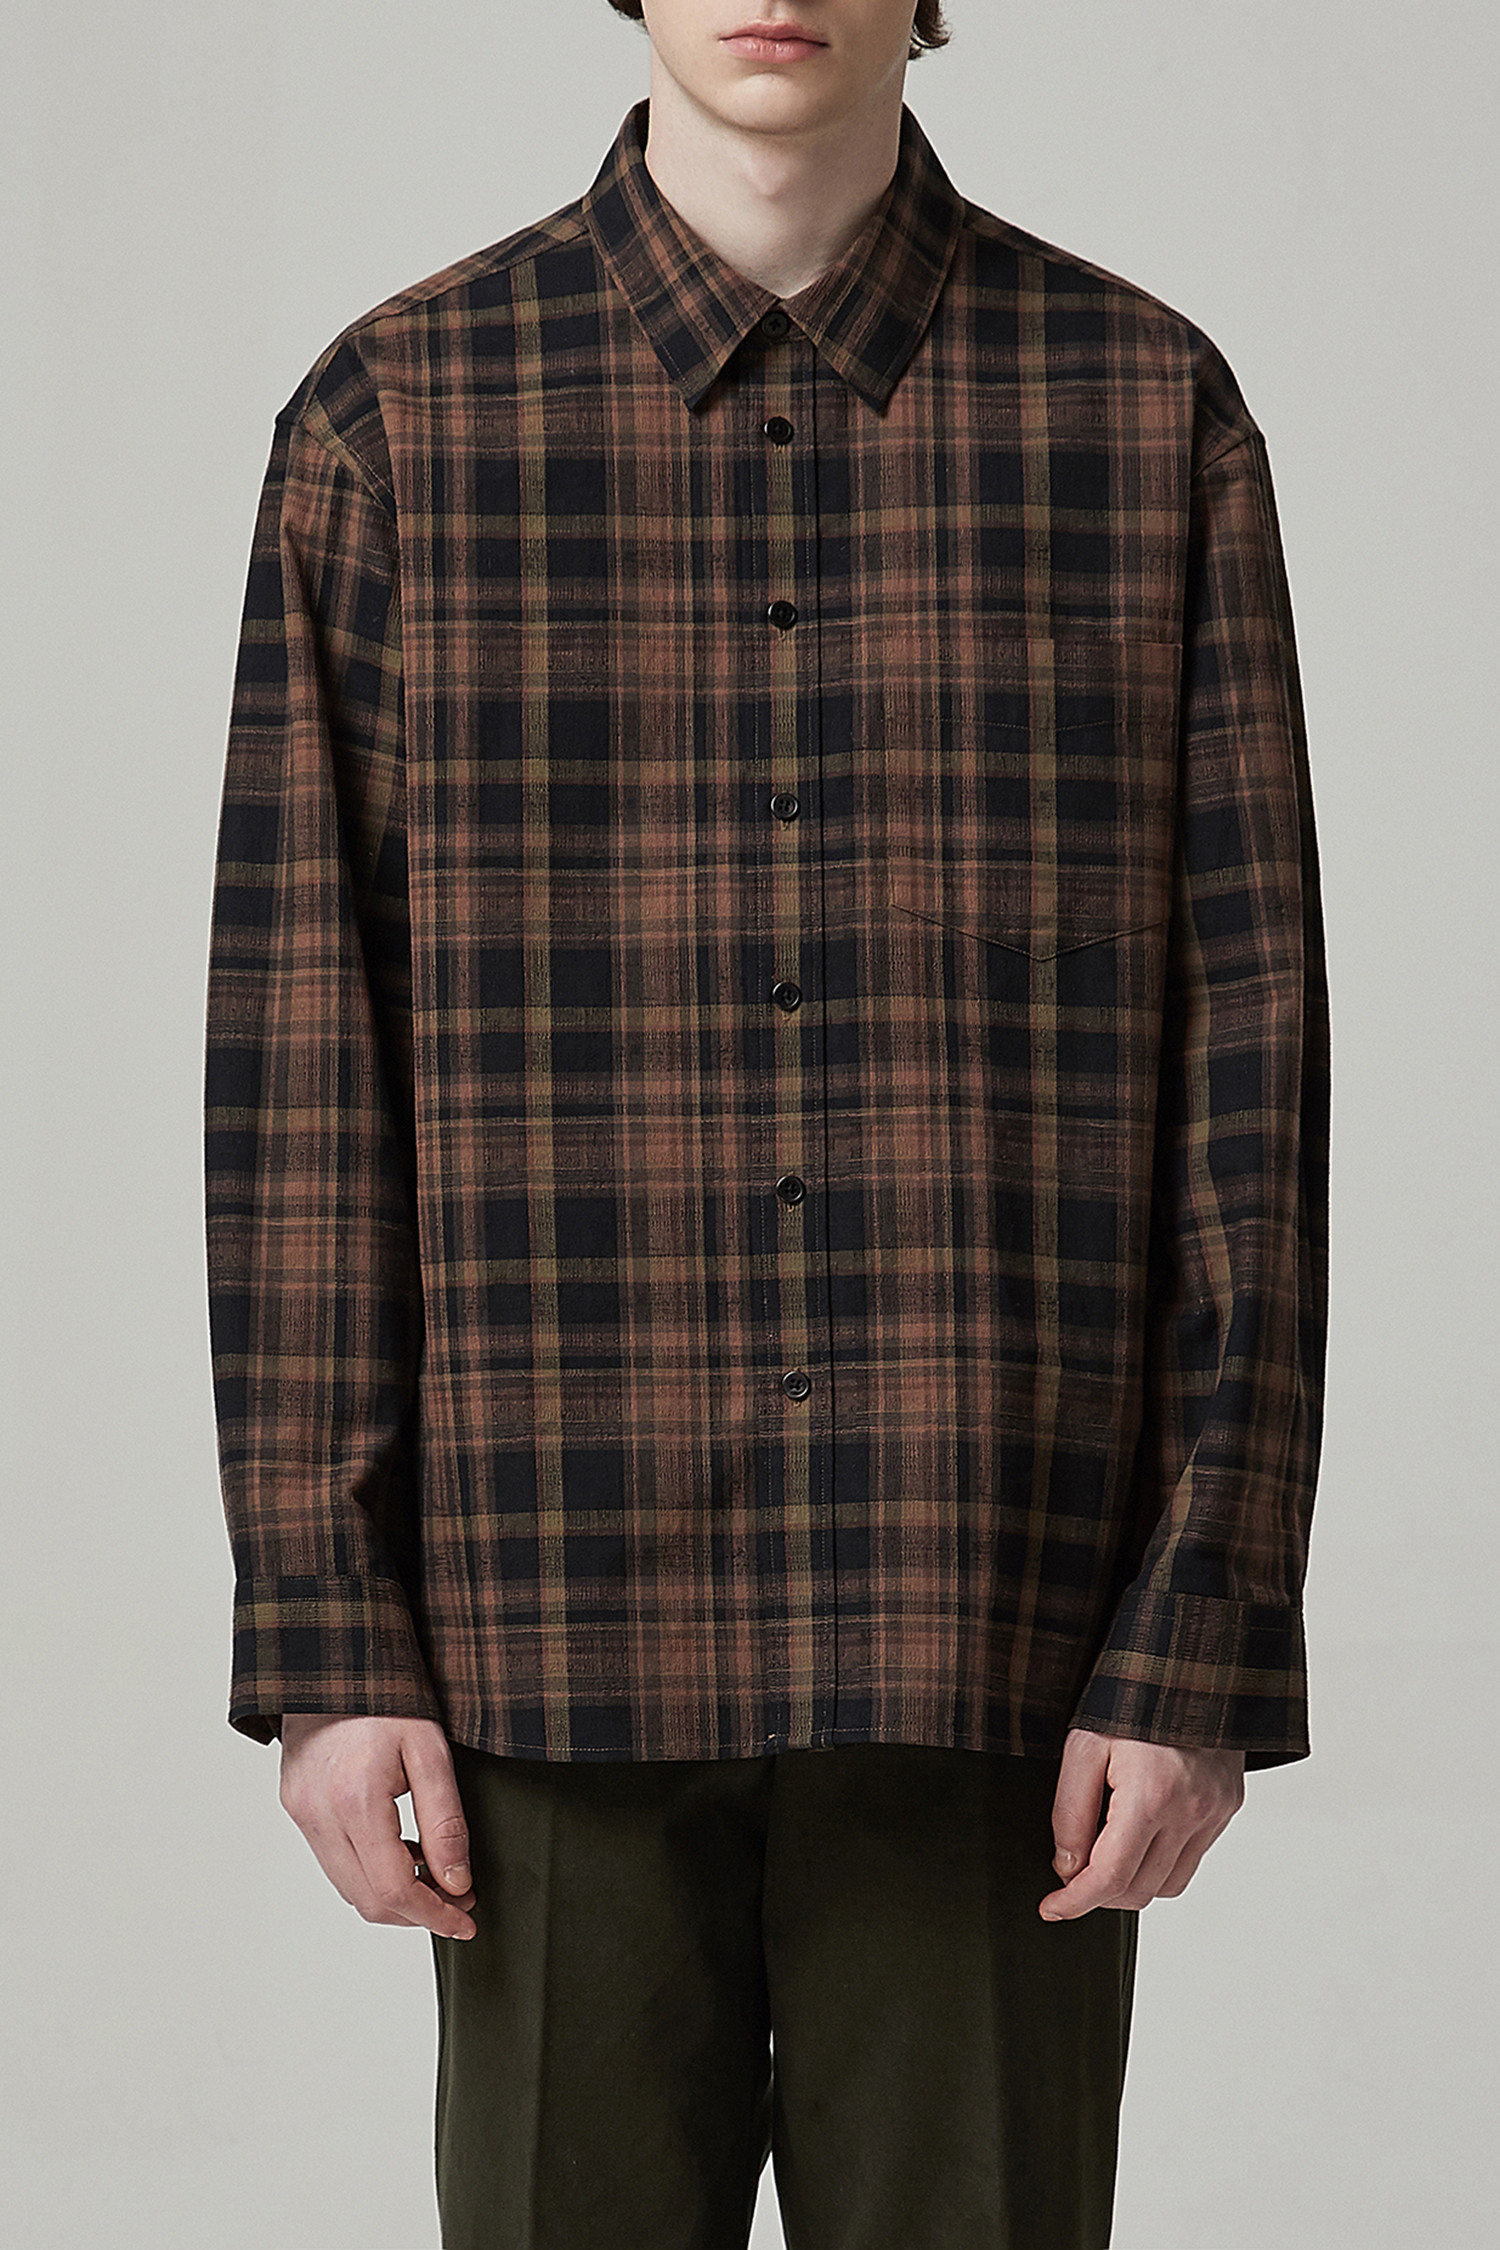 somelos multi check loose fit shirt_CUSTOMELLOW